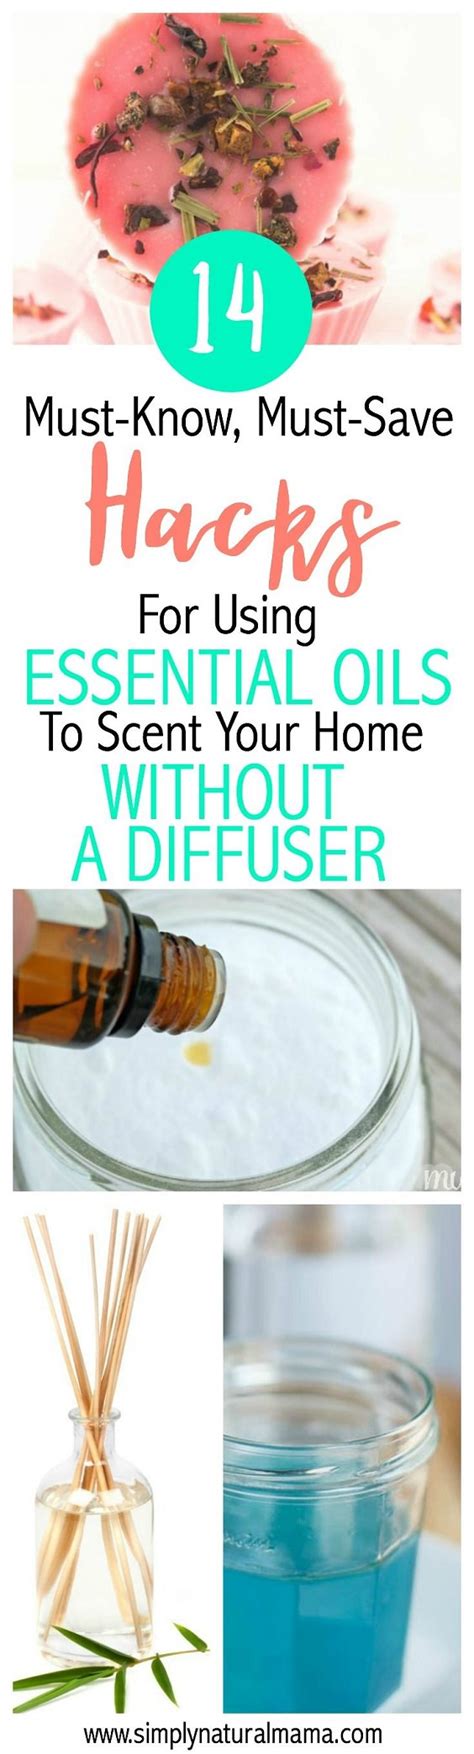 Hacks To Using Essential Oils To Scent Your Home Without A Diffuser House Good